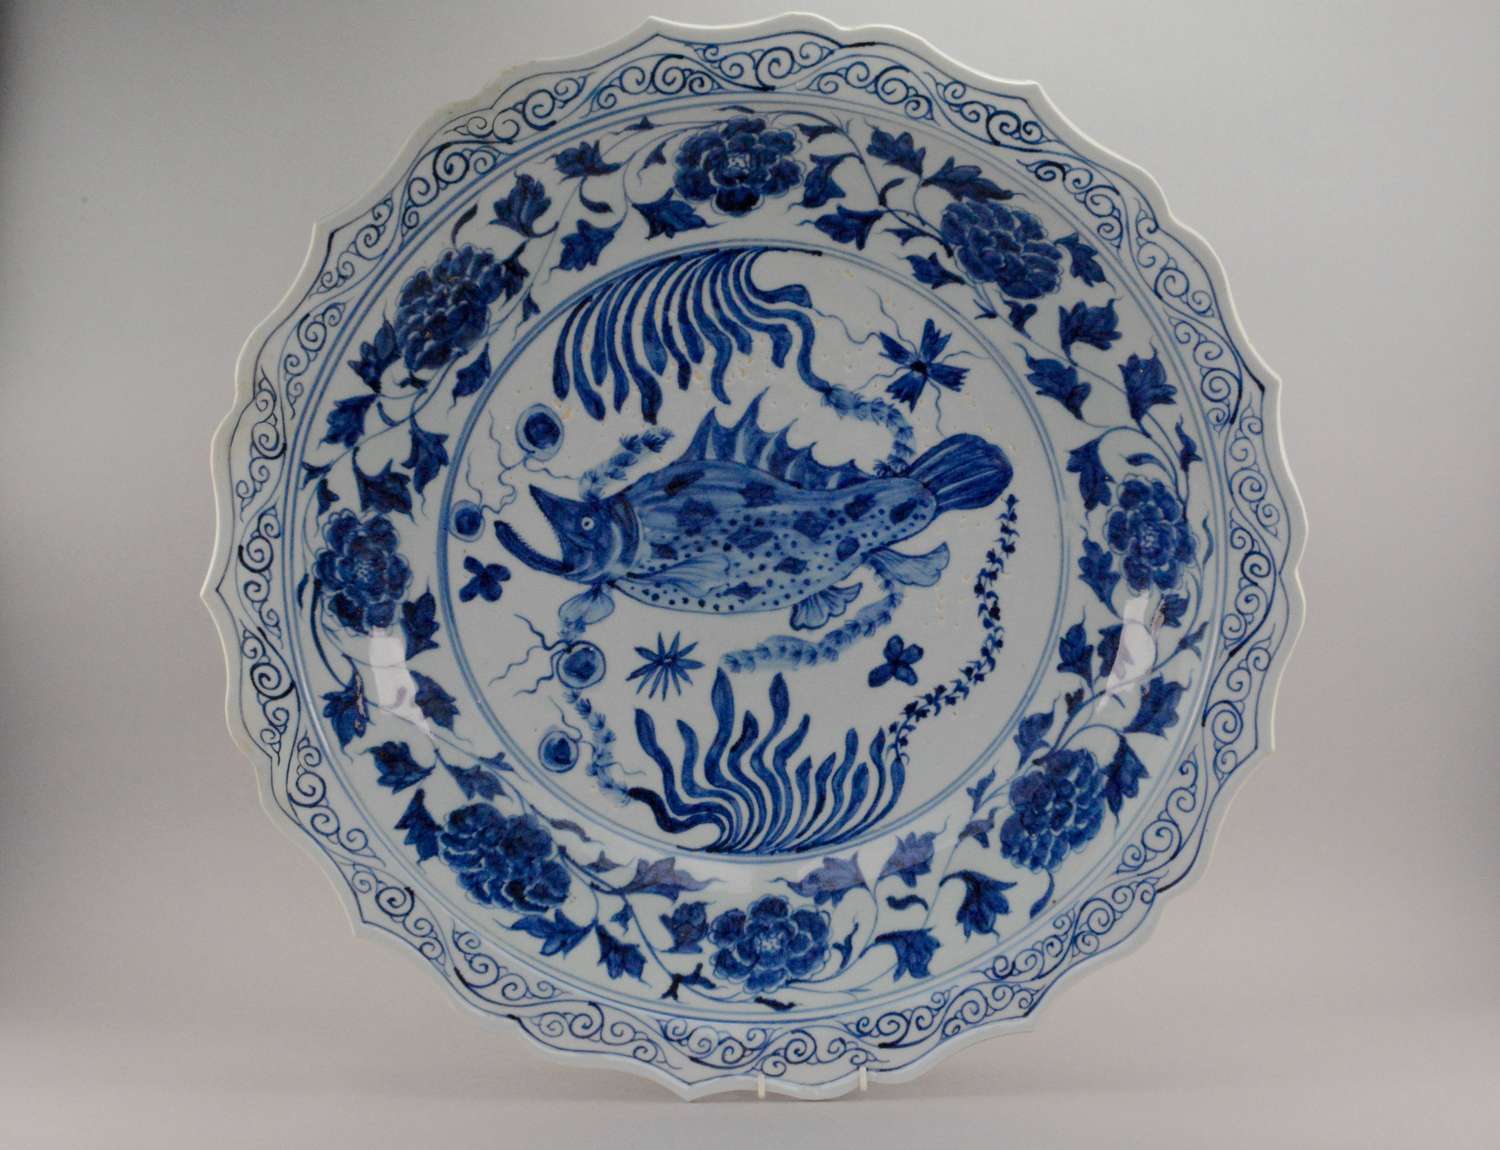 Japanese Meiji Period (1868-1889) huge charger-serving plate